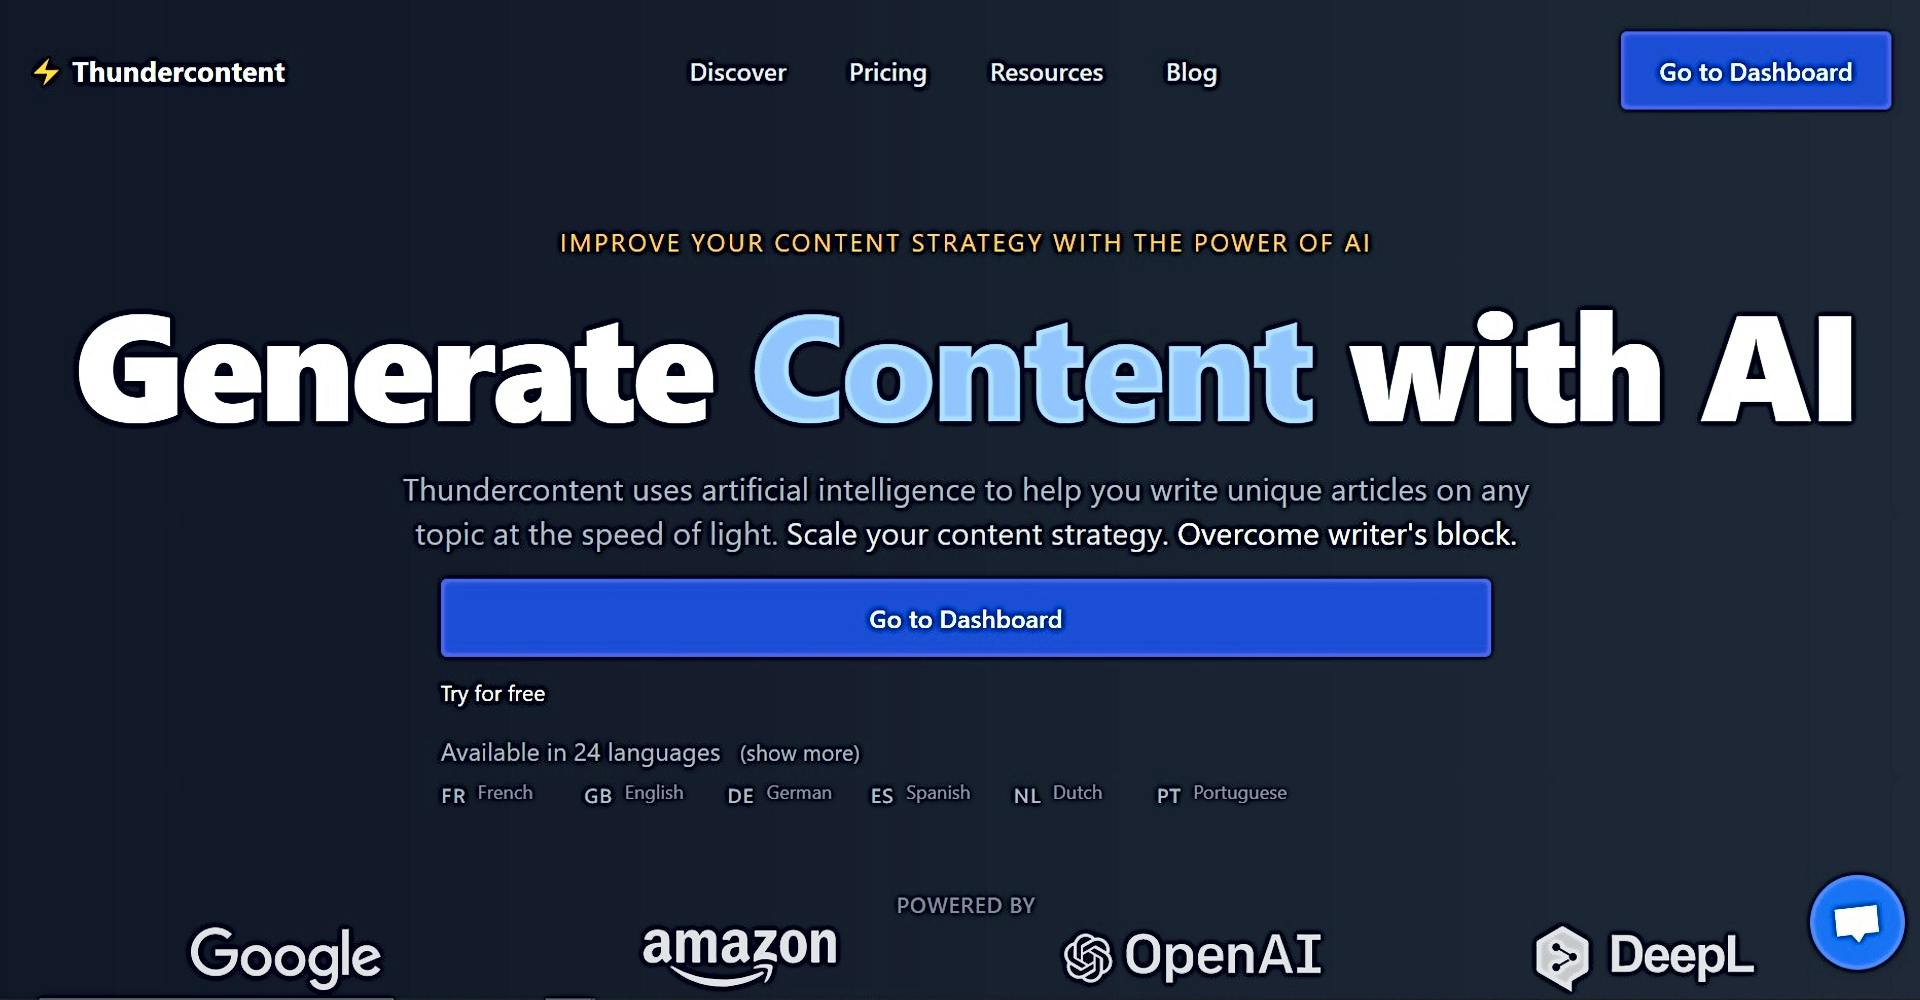 Thundercontent featured